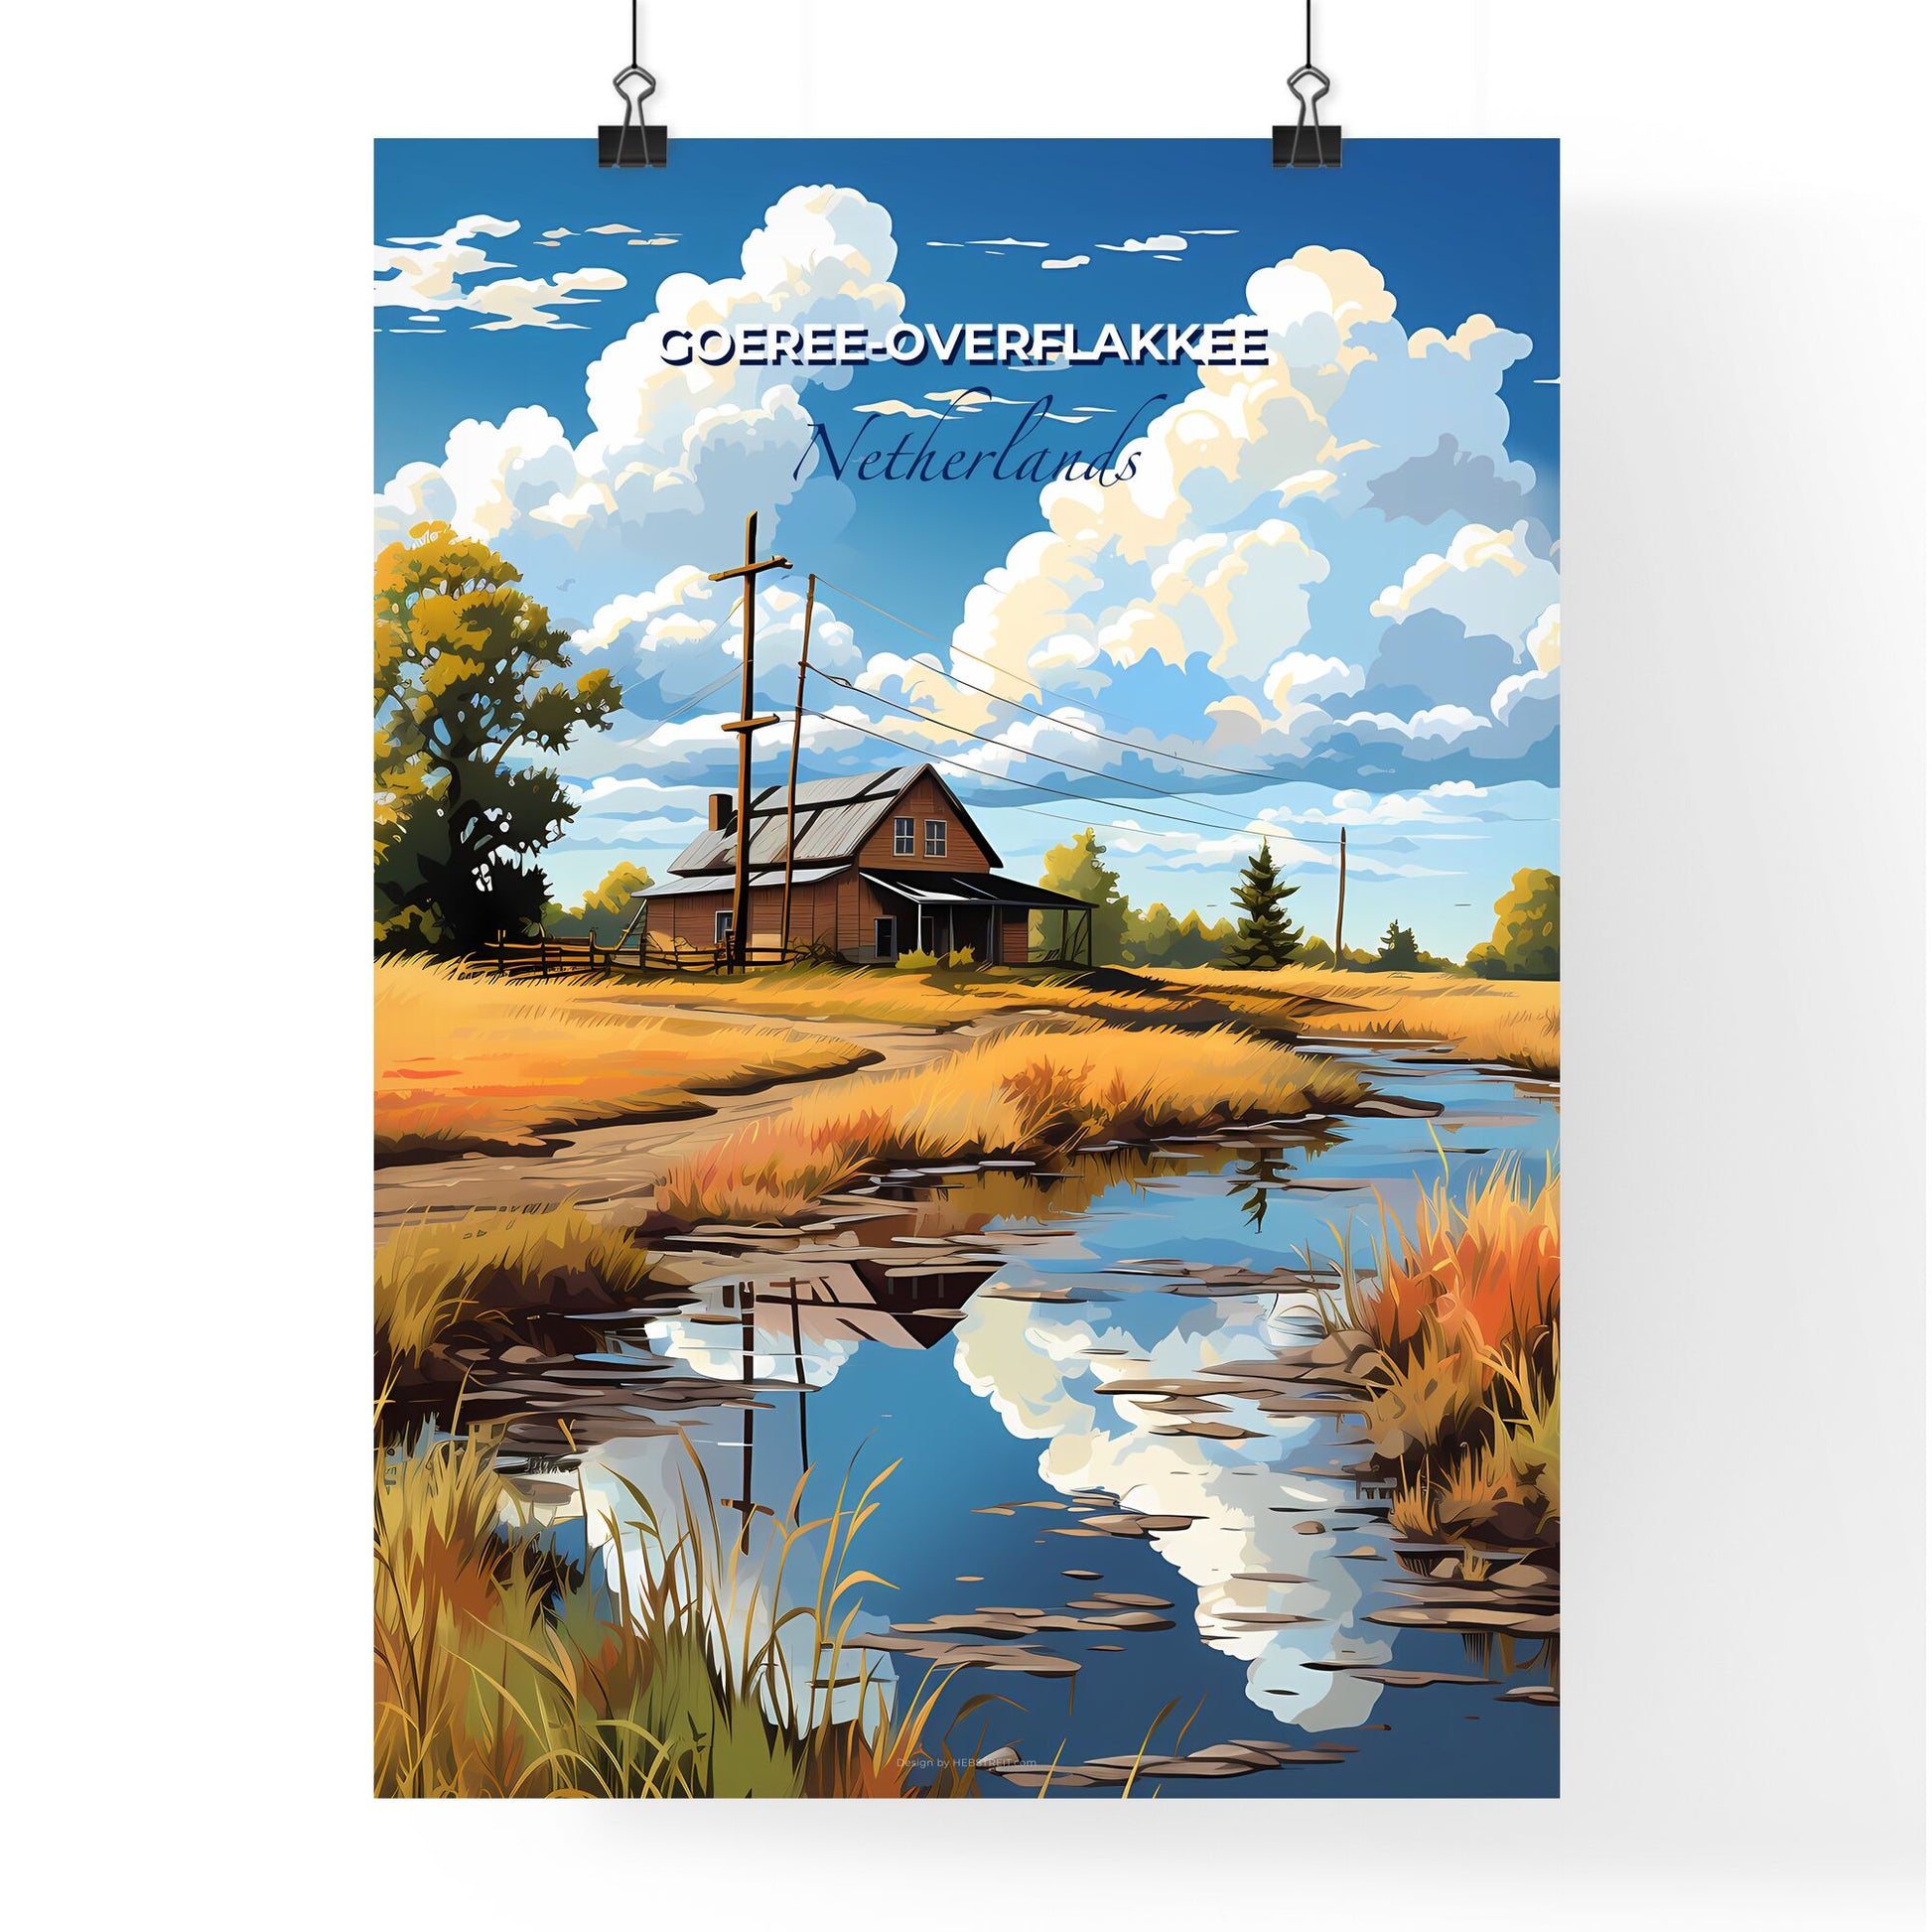 Goeree-Overflakkee, Netherlands, A Poster of a house near a stream Default Title